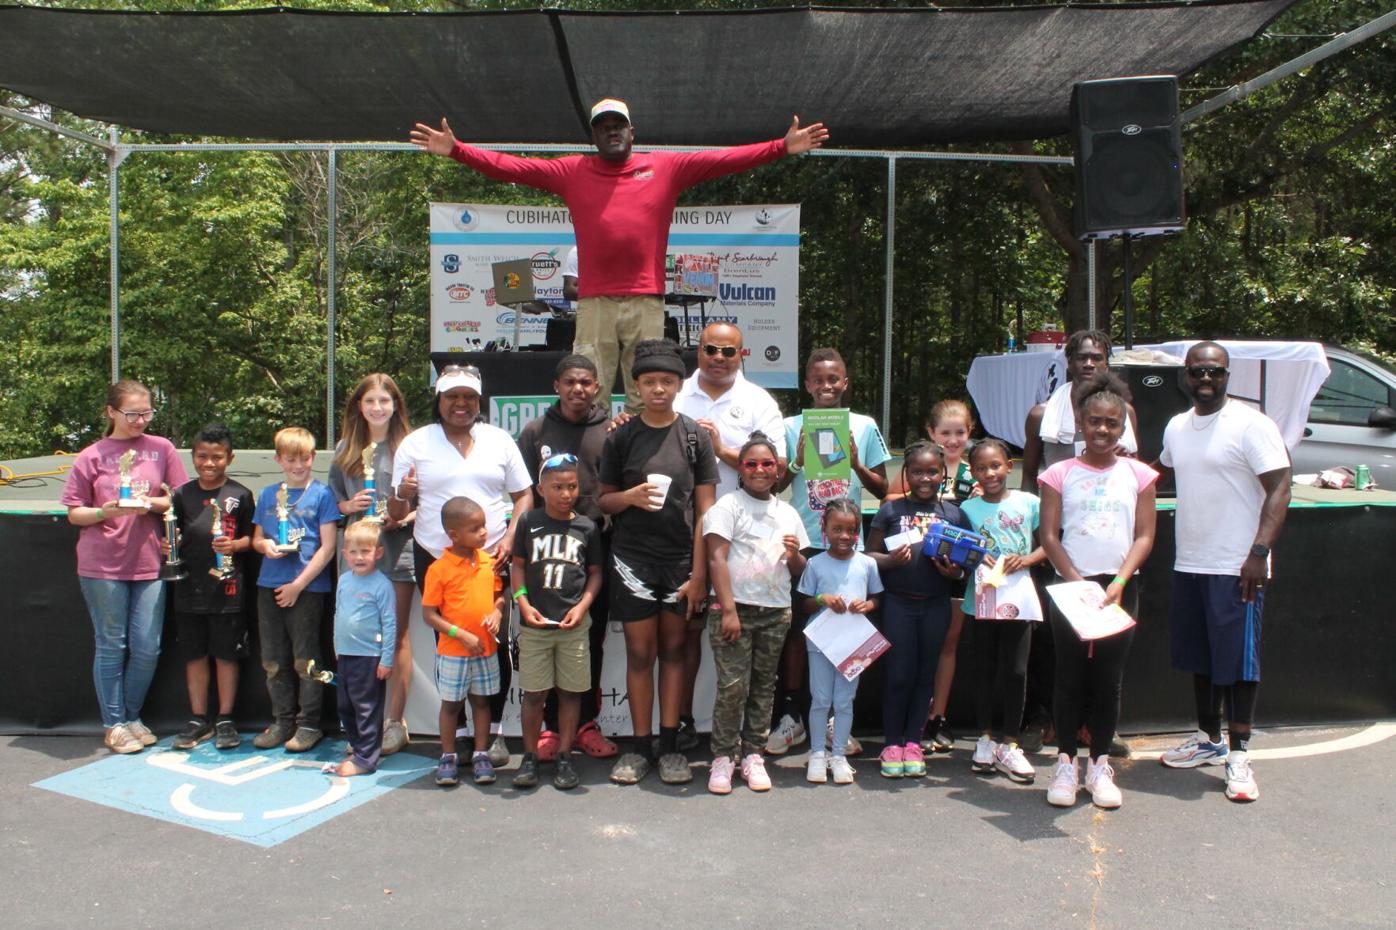 Attendance doubles for second annual kids fishing day event with